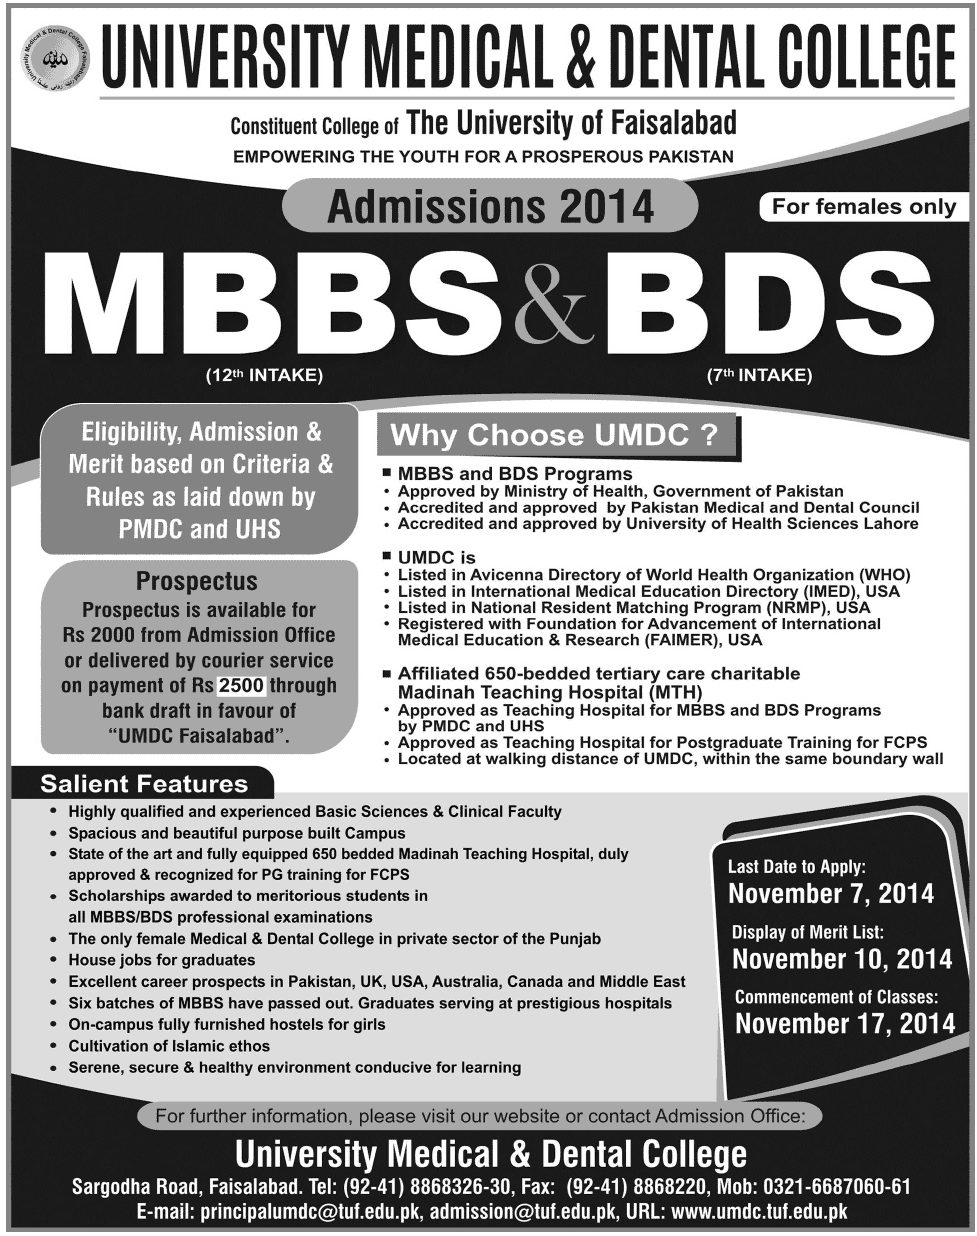 University Medical And Dental College Faisalabad Admission 2014 Mbbs, Bds